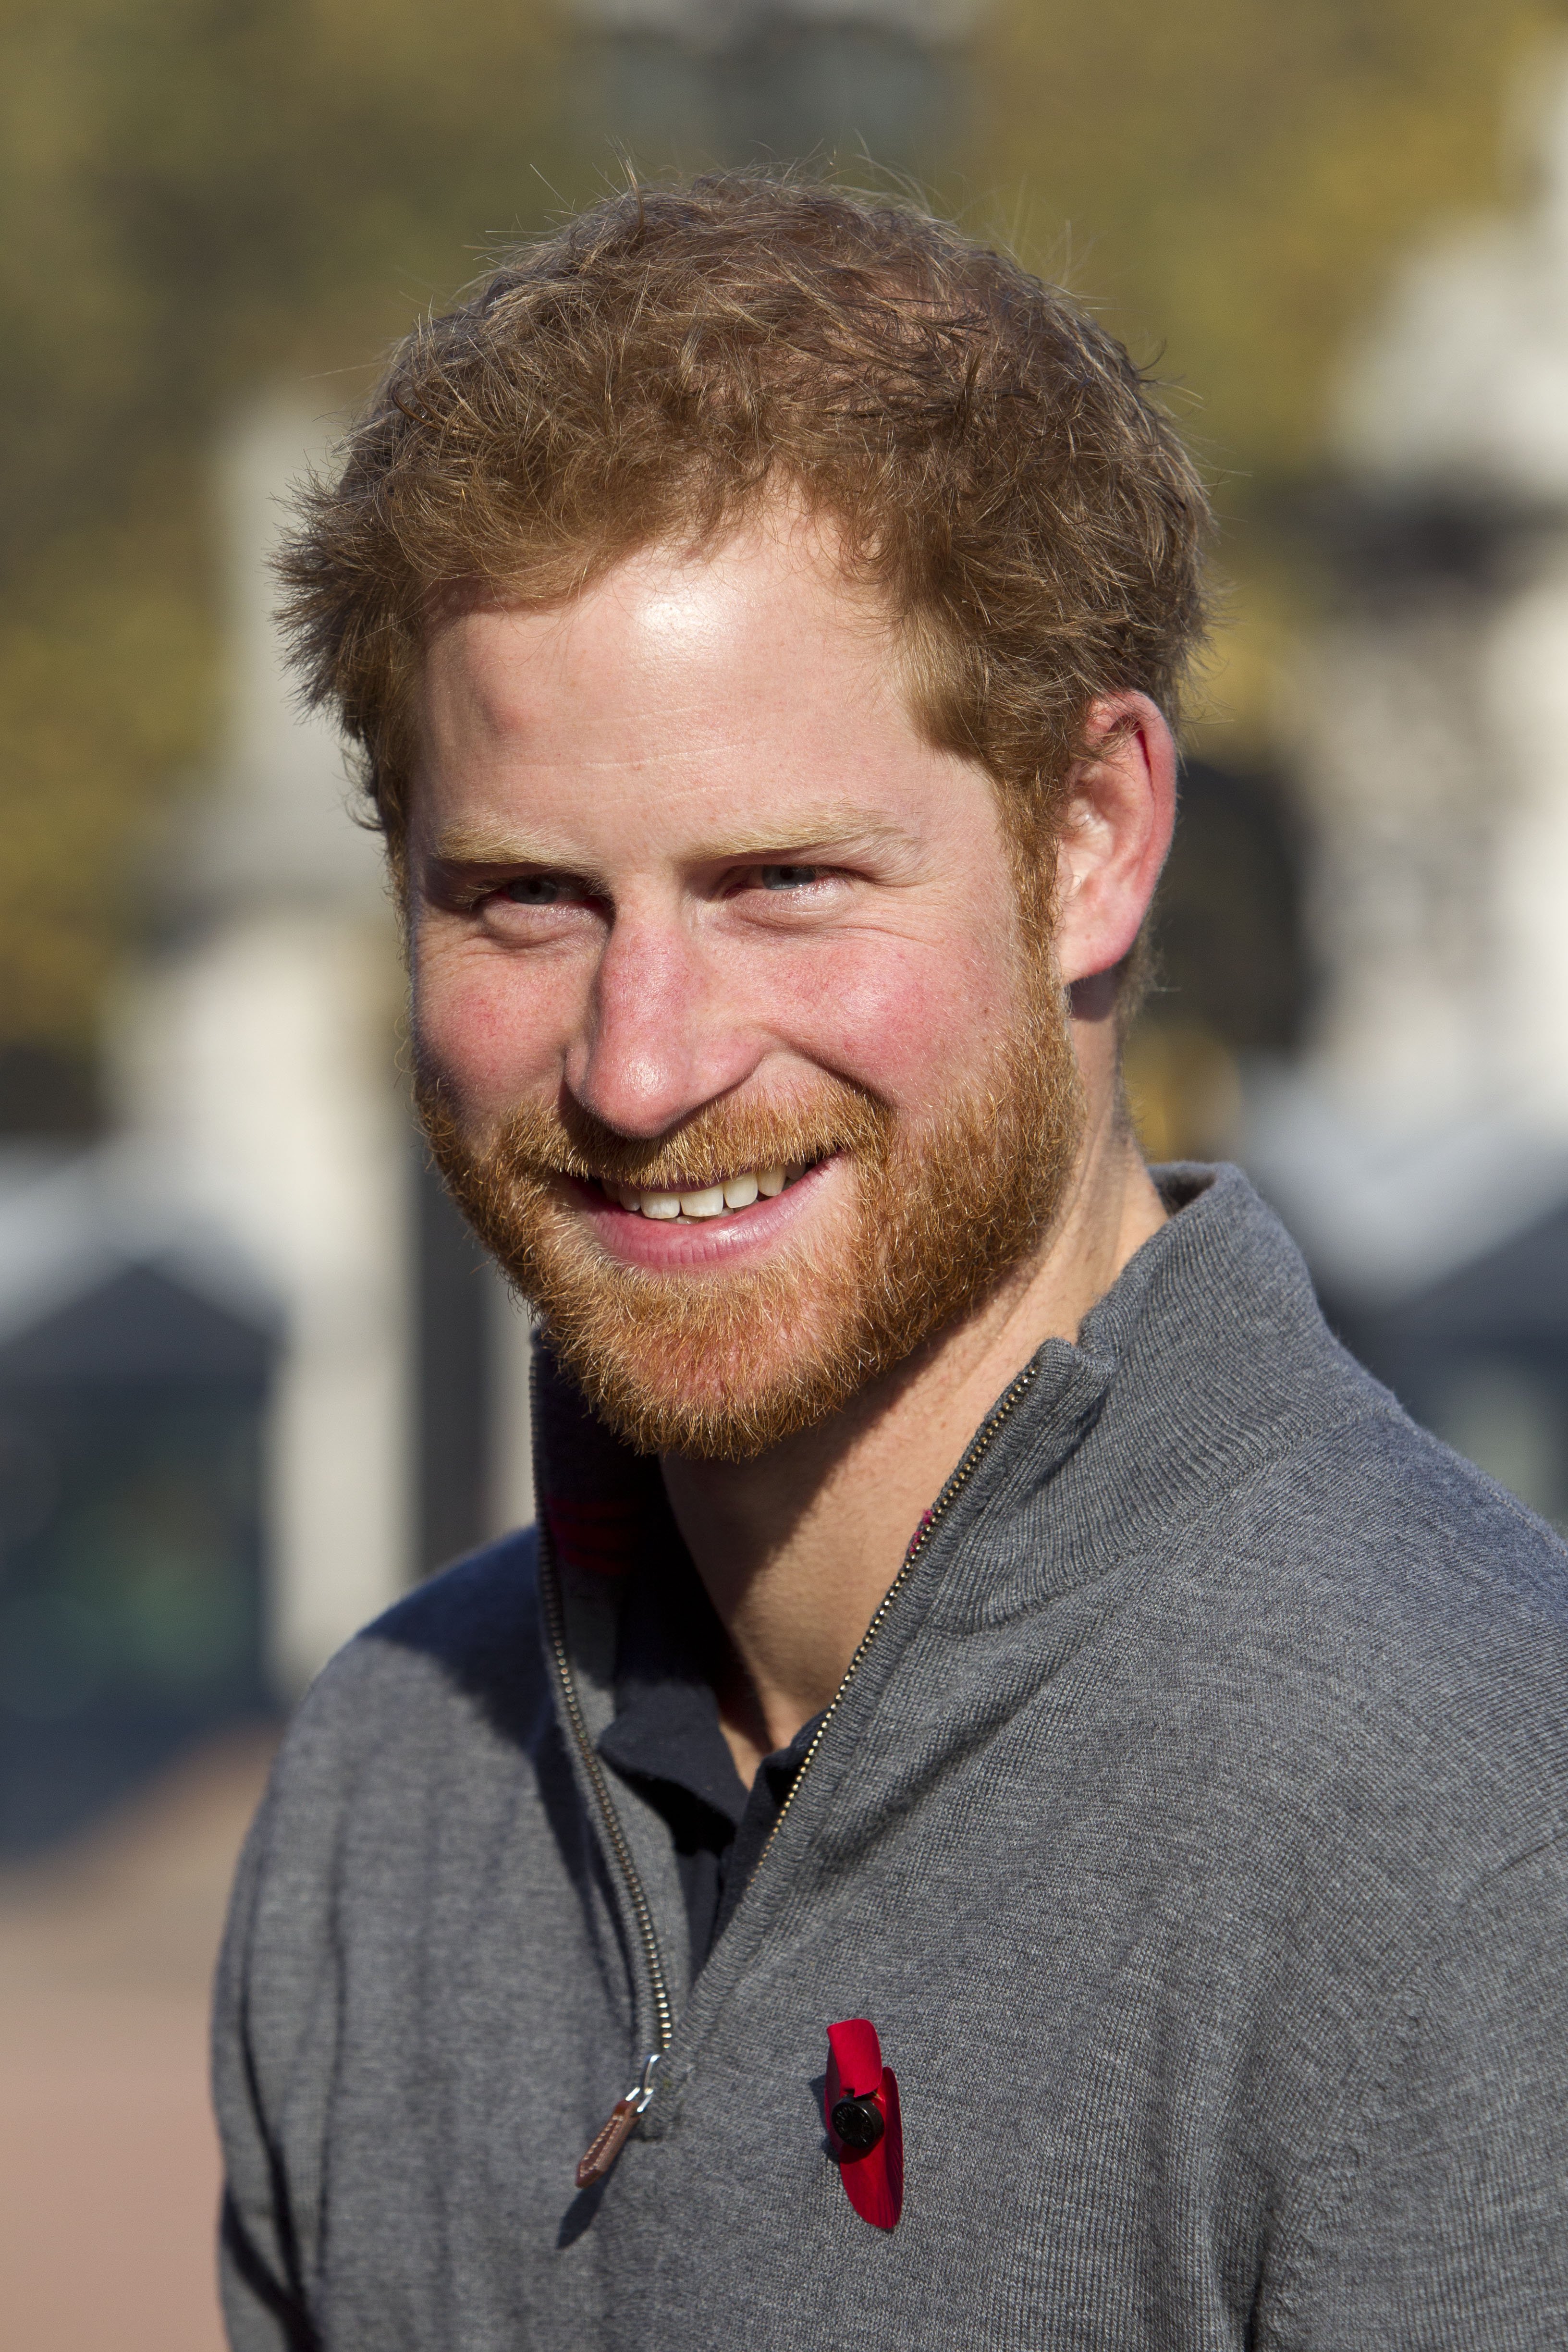 Prince Harry at the forecourt of Buckingham Palace on November 1, 2015 in London, England | Photo: Getty Images